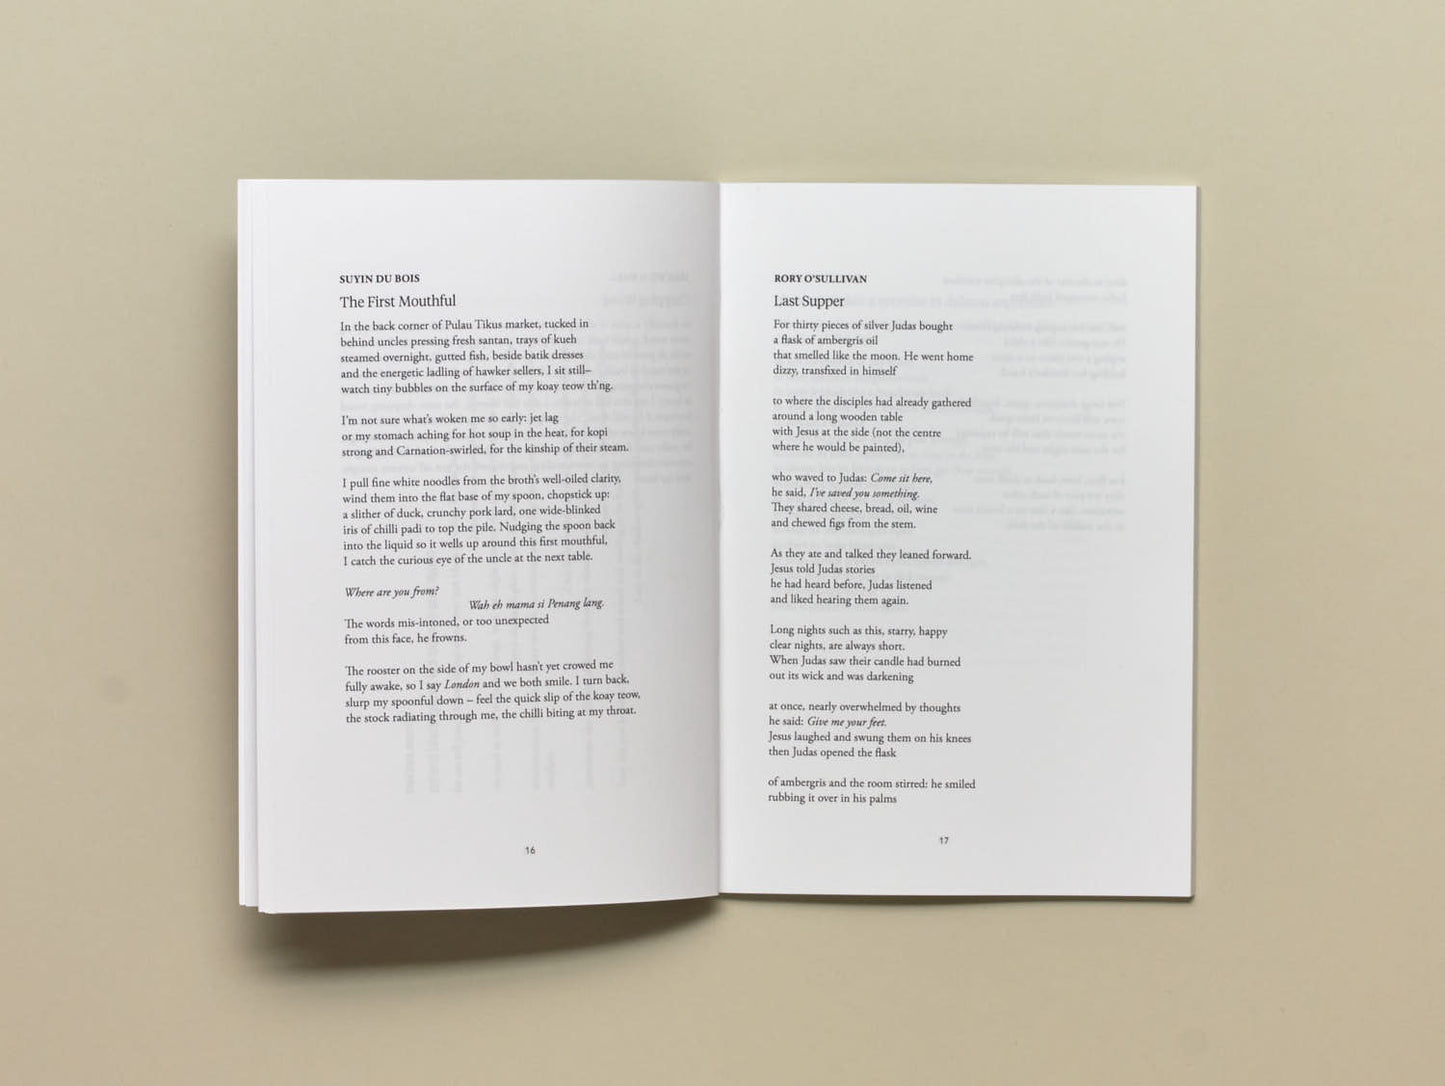 Helen Bowell (ed.), Bi+ Lines: an anthology of contemporary Bi+ poets